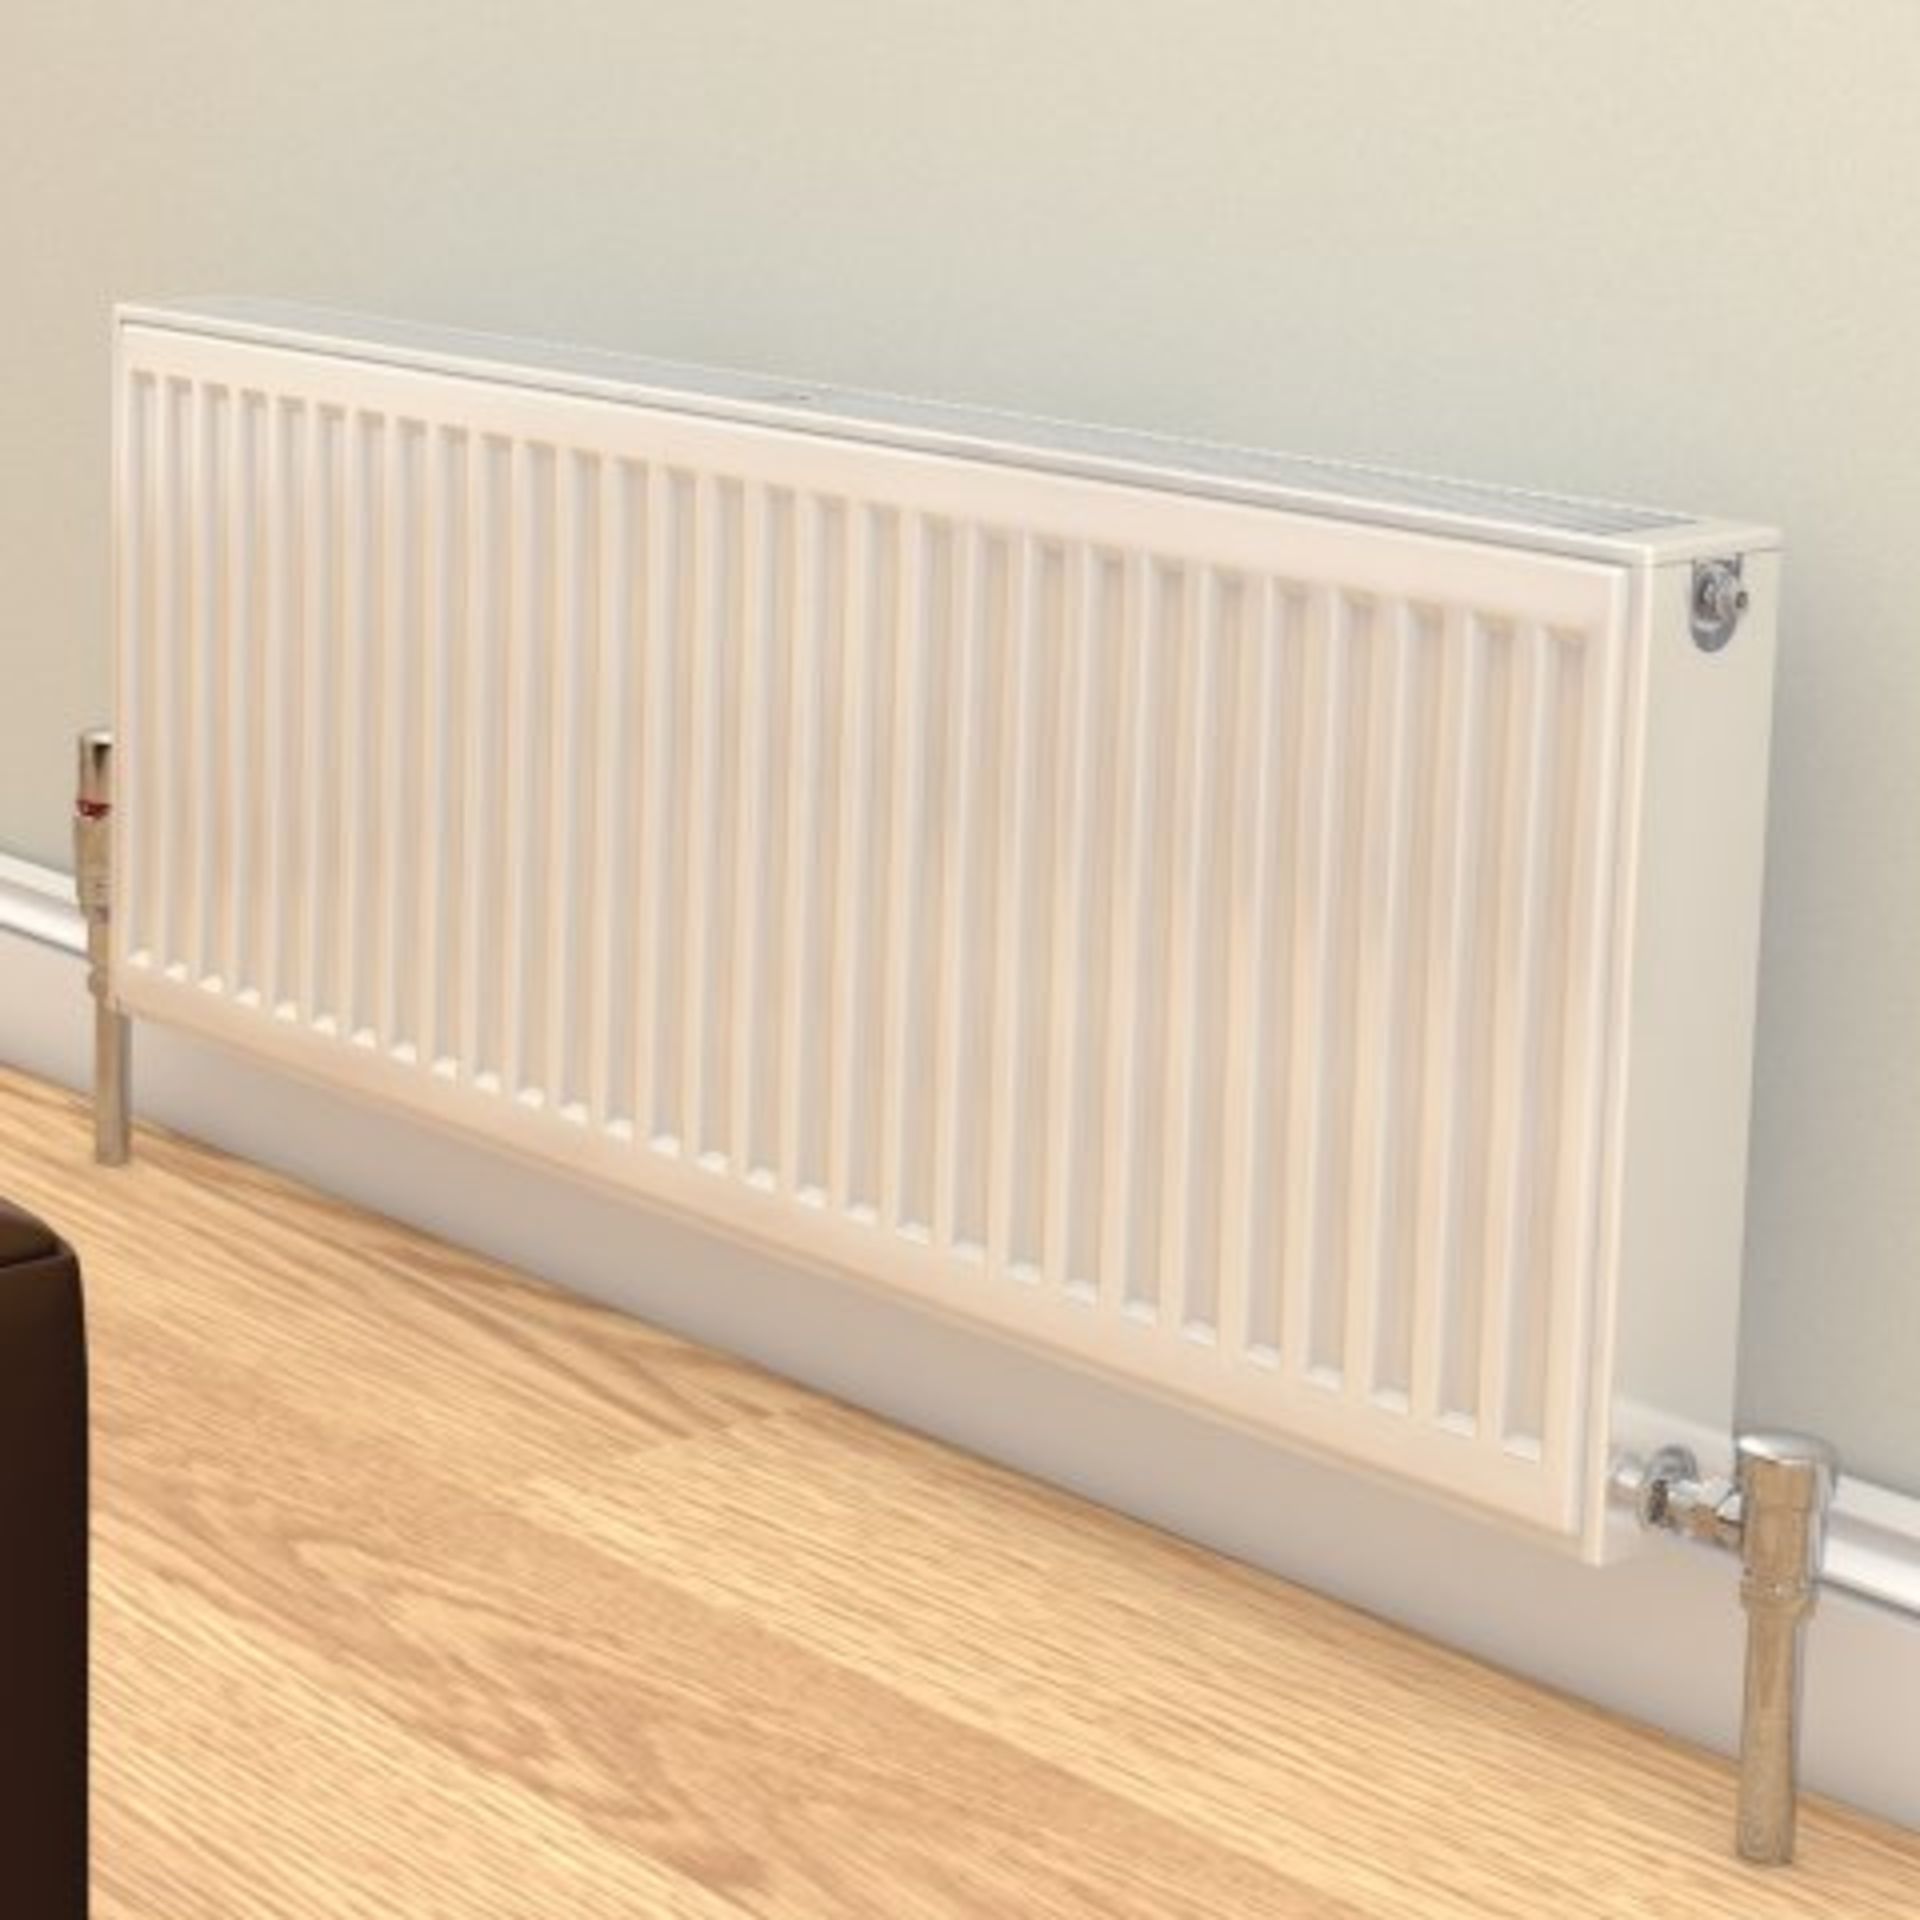 (I148) 600x1600mm White Vita Compact Horizontal Radiator K2. RRP £299.99. Our beautifully produced - Image 2 of 2